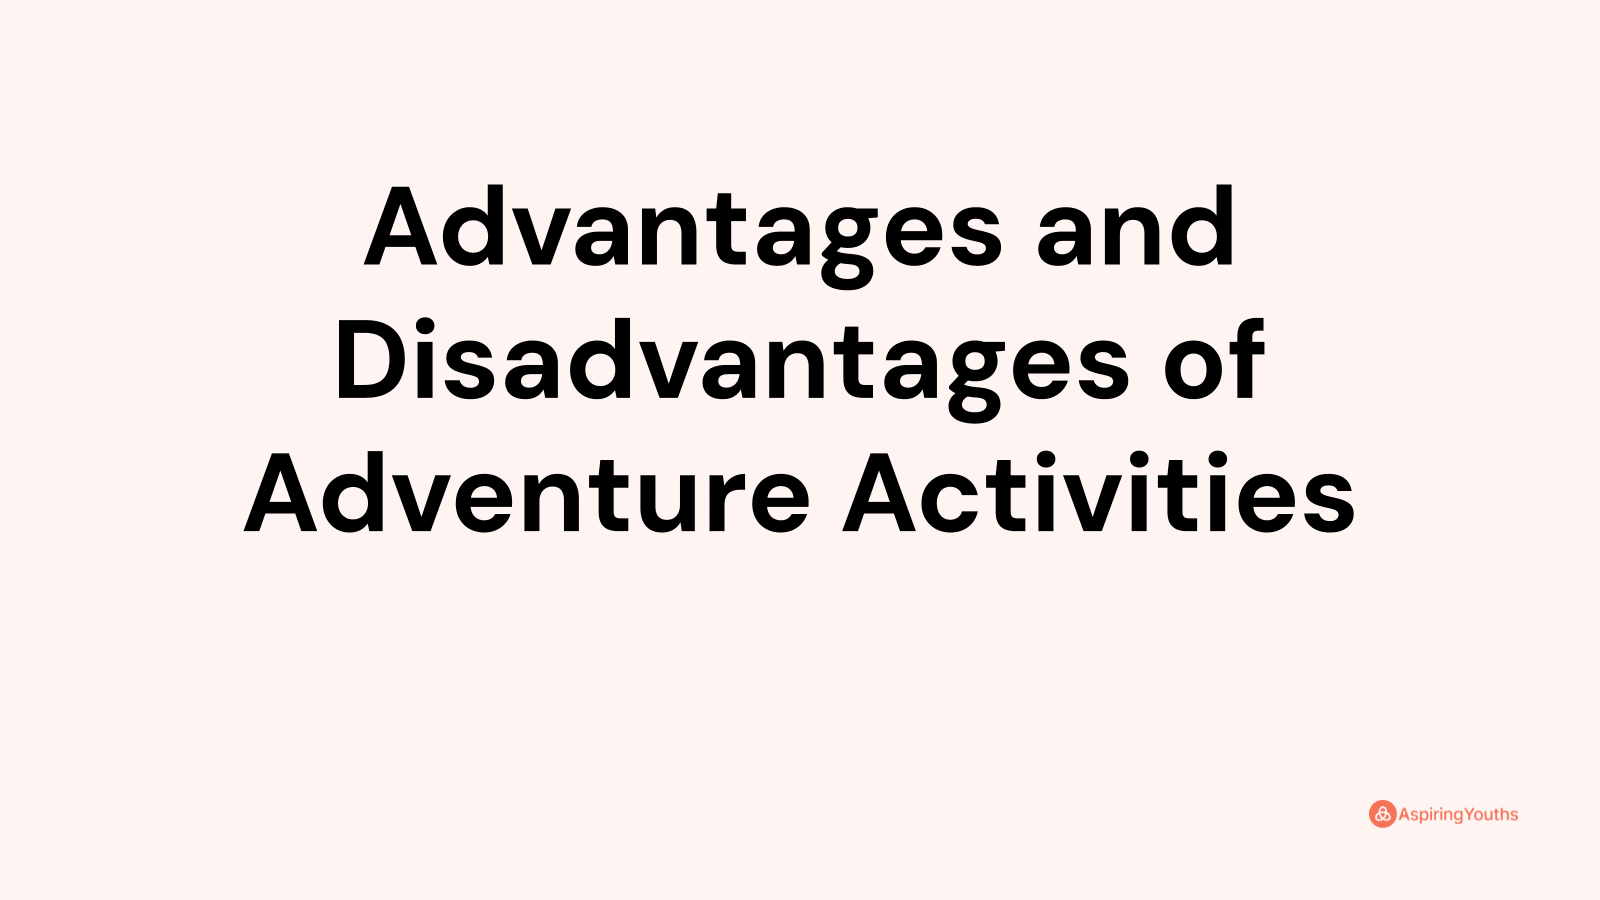 Advantages and disadvantages of Adventure Activities